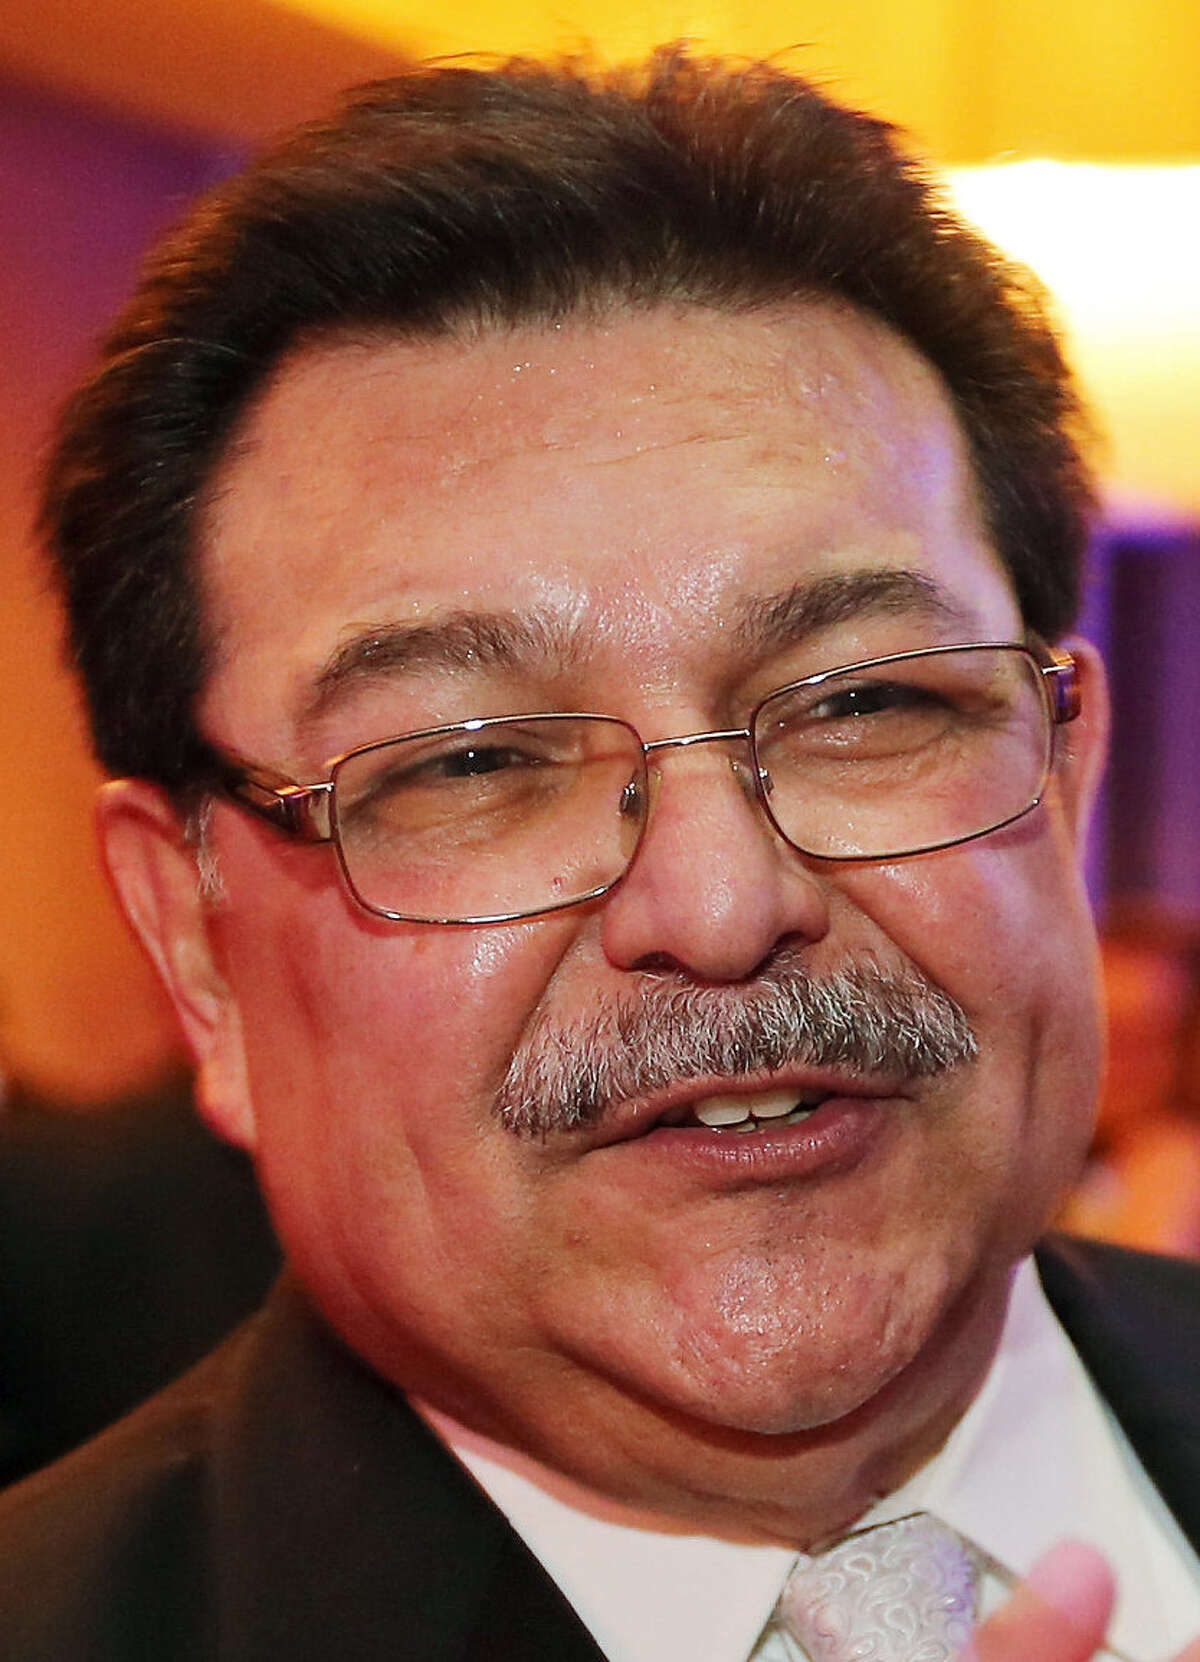 Former City Manager Alex Briseño has expressed interest in the role of board chairman.